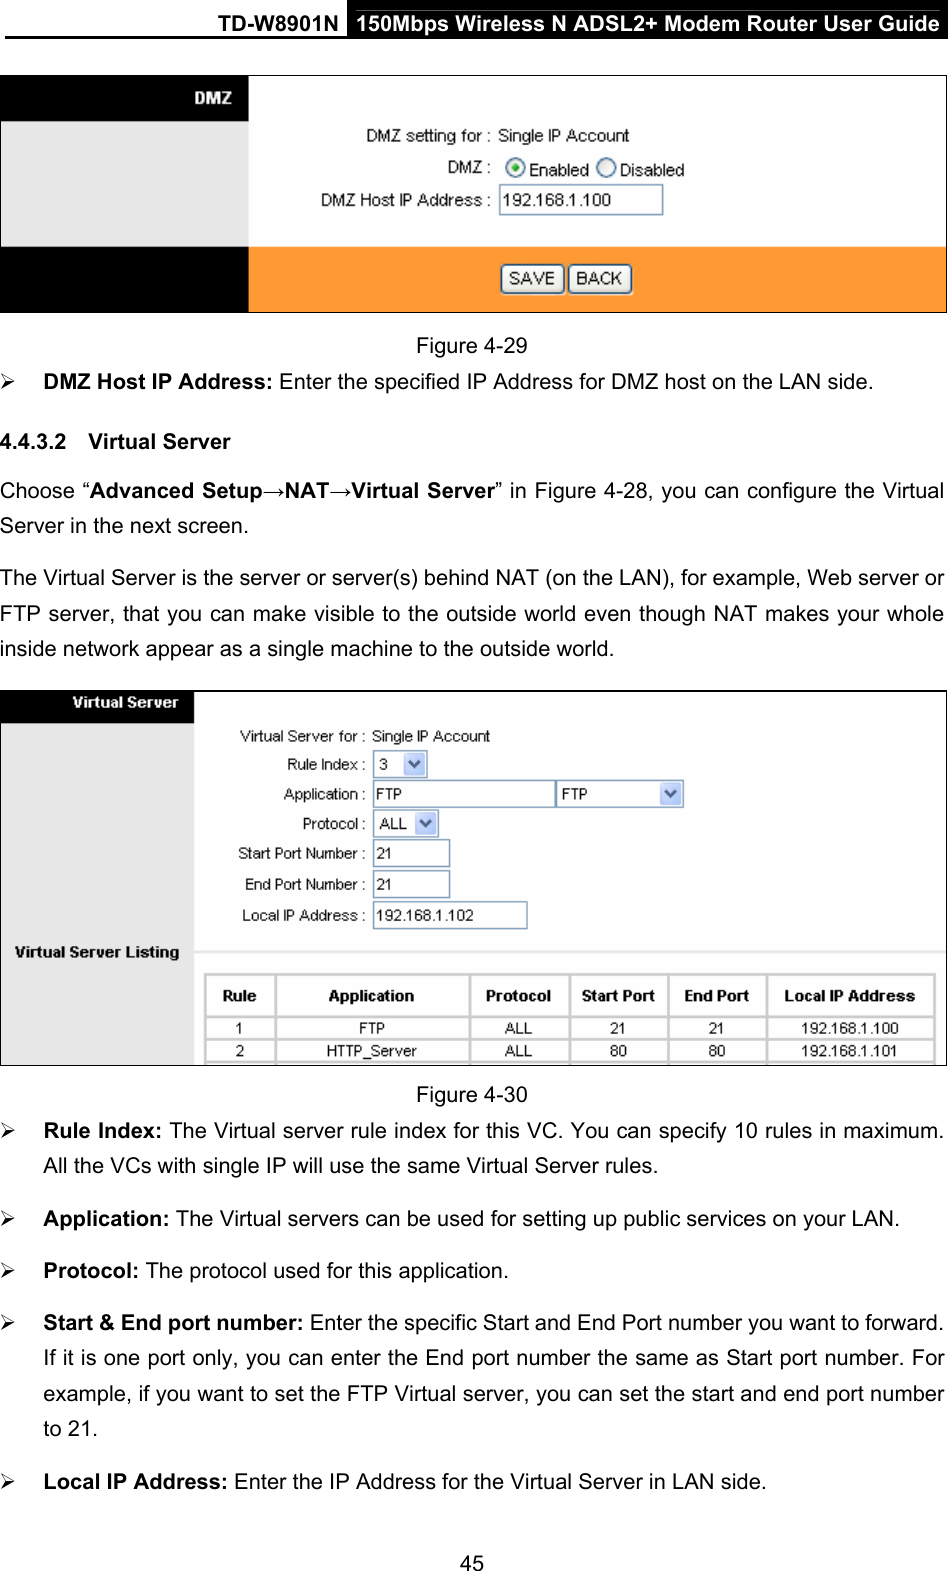 TD-W8901N  150Mbps Wireless N ADSL2+ Modem Router User Guide 45  Figure 4-29  DMZ Host IP Address: Enter the specified IP Address for DMZ host on the LAN side. 4.4.3.2  Virtual Server Choose “Advanced Setup→NAT→Virtual Server” in Figure 4-28, you can configure the Virtual Server in the next screen.   The Virtual Server is the server or server(s) behind NAT (on the LAN), for example, Web server or FTP server, that you can make visible to the outside world even though NAT makes your whole inside network appear as a single machine to the outside world.  Figure 4-30  Rule Index: The Virtual server rule index for this VC. You can specify 10 rules in maximum. All the VCs with single IP will use the same Virtual Server rules.  Application: The Virtual servers can be used for setting up public services on your LAN.  Protocol: The protocol used for this application.  Start &amp; End port number: Enter the specific Start and End Port number you want to forward. If it is one port only, you can enter the End port number the same as Start port number. For example, if you want to set the FTP Virtual server, you can set the start and end port number to 21.  Local IP Address: Enter the IP Address for the Virtual Server in LAN side. 